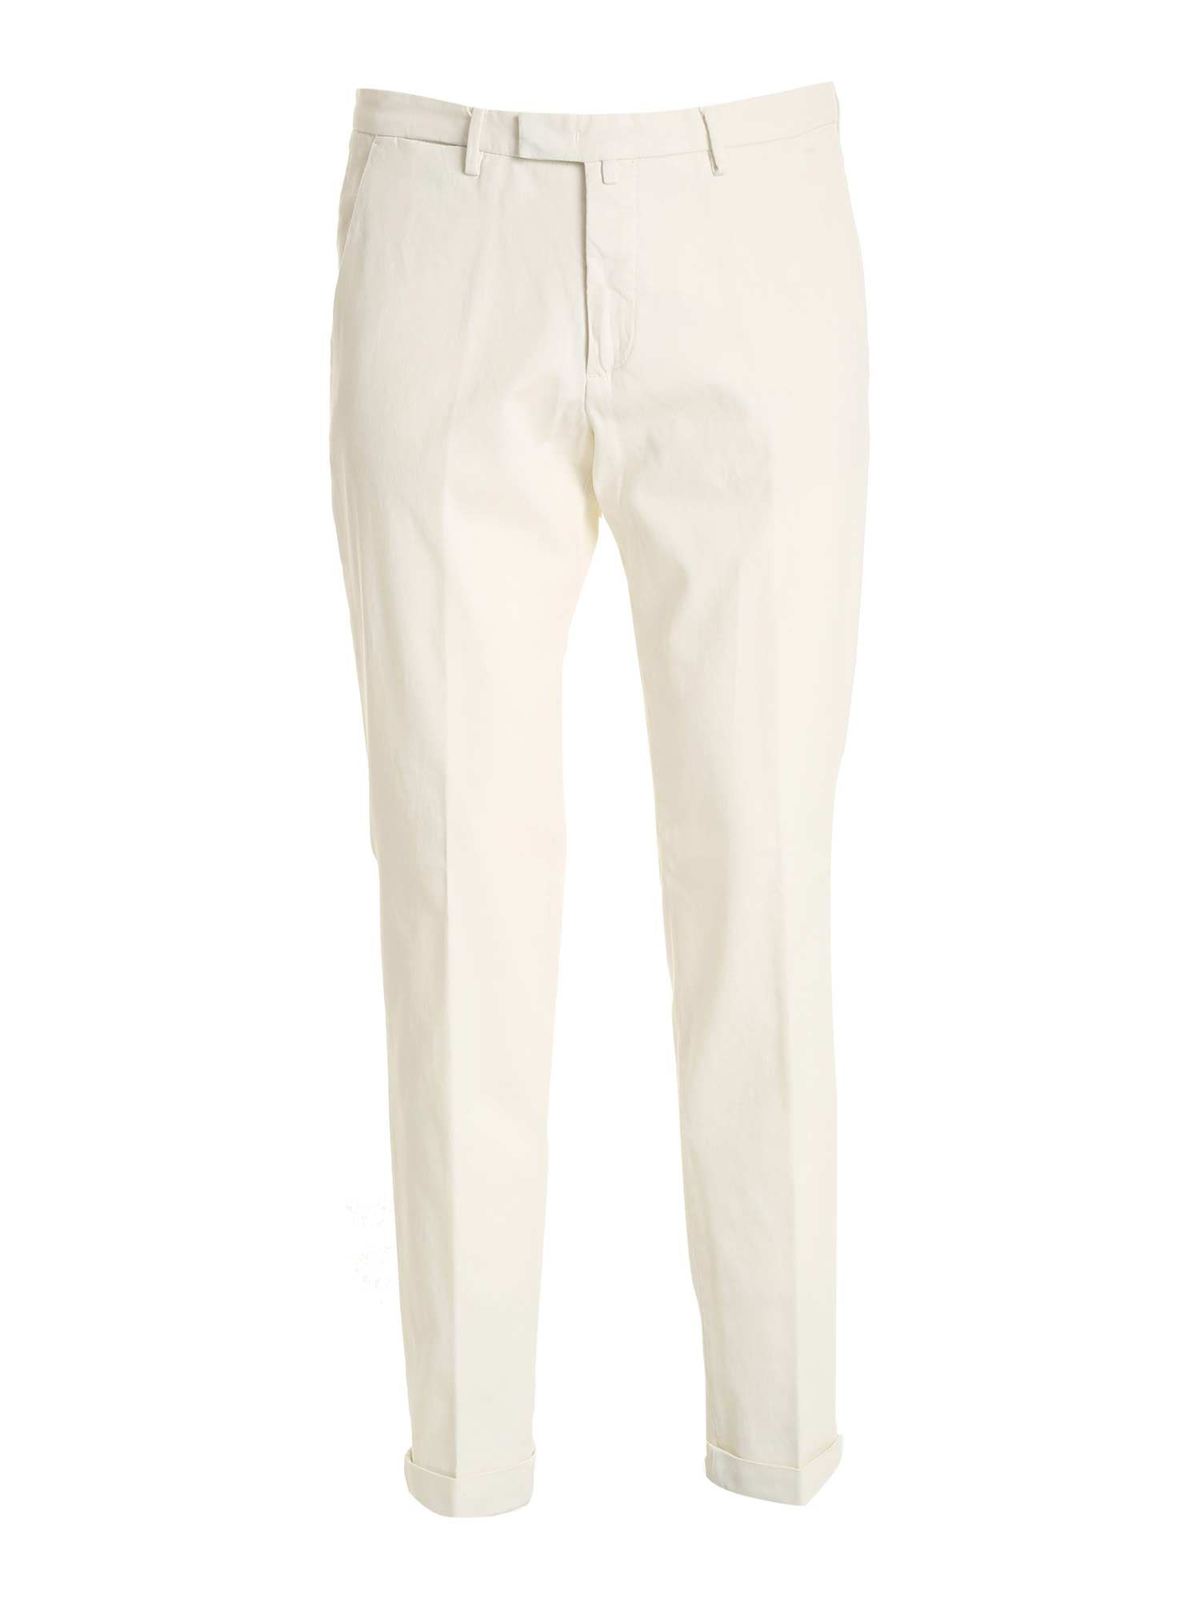 BRIGLIA 1949 HONEYCOMB PANTS IN BEIGE IN IVORY COLOR